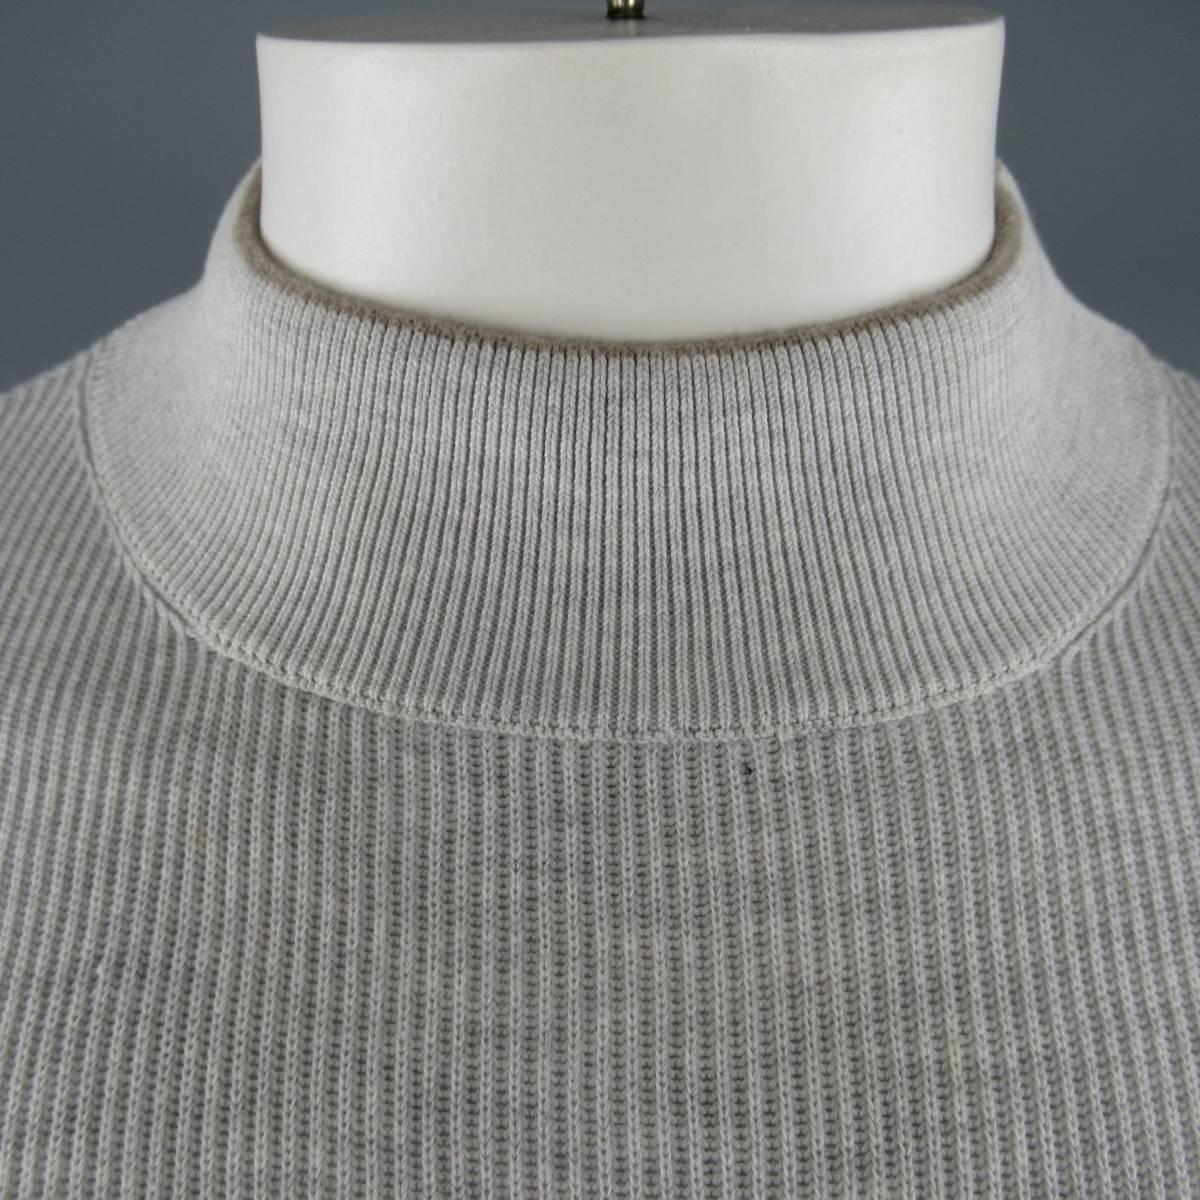 BRUNELLO CUCINELLI pullover sweater comes in light Heather gray ribbed cotton knit with a high mock neck, slit waist band and tan trim. Made in Italy.
 
Excellent Pre-Owned Condition.
Marked: 52
 
Measurements:
 
Shoulder: 17 in.
Chest: 44